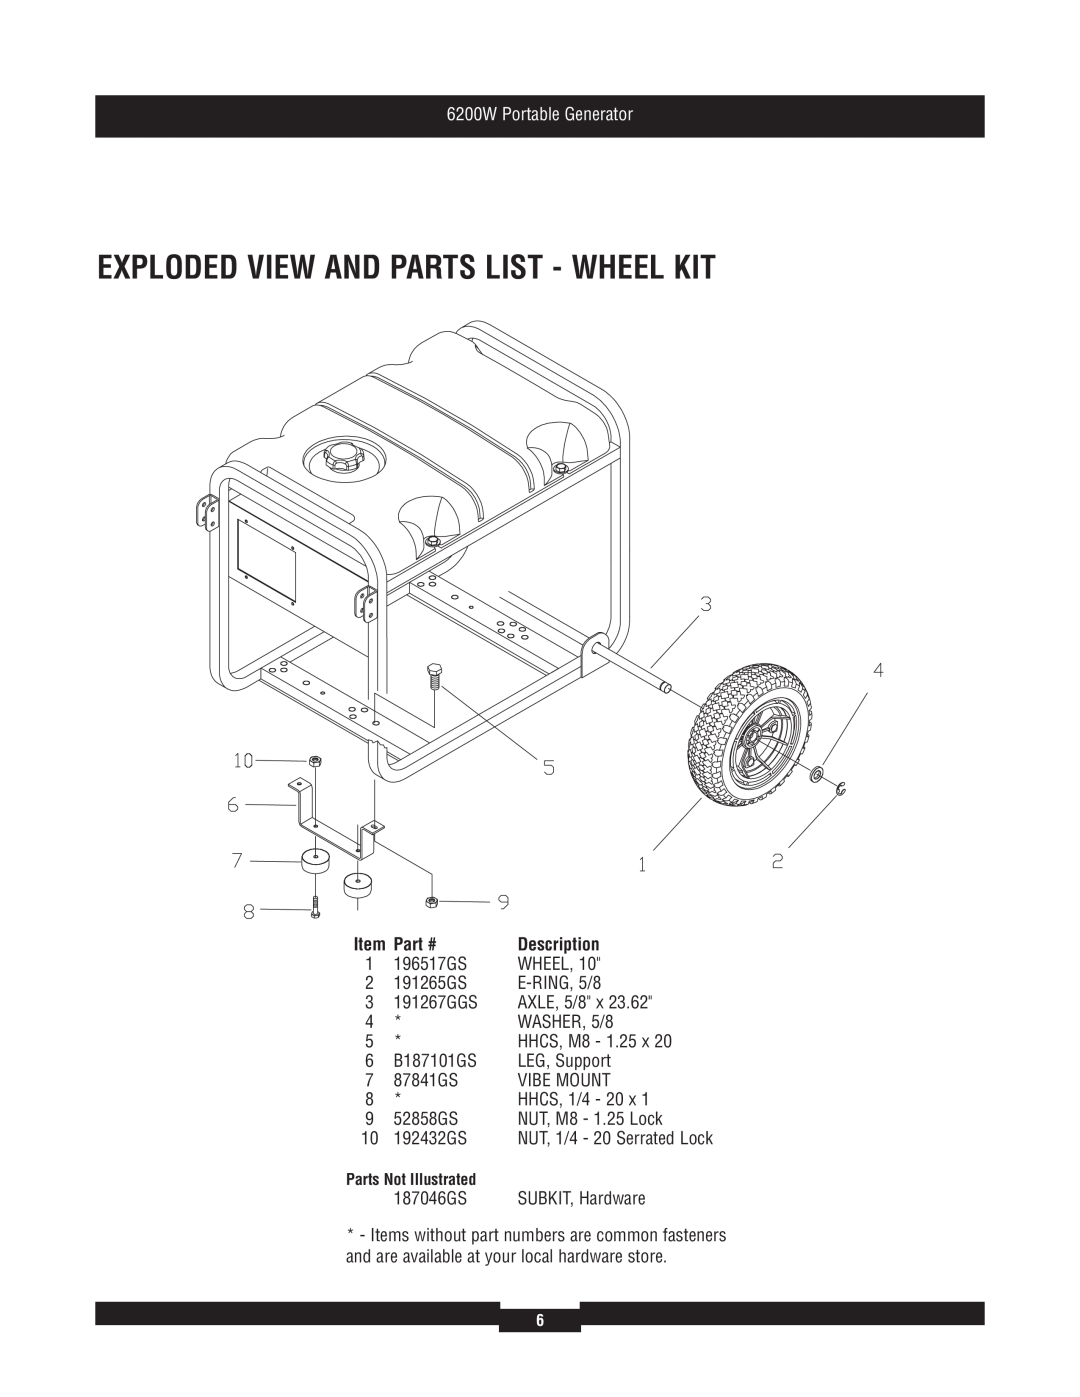 Briggs & Stratton 30386 manual Exploded View And Parts List - Wheel Kit, 6200W Portable Generator, Part # 